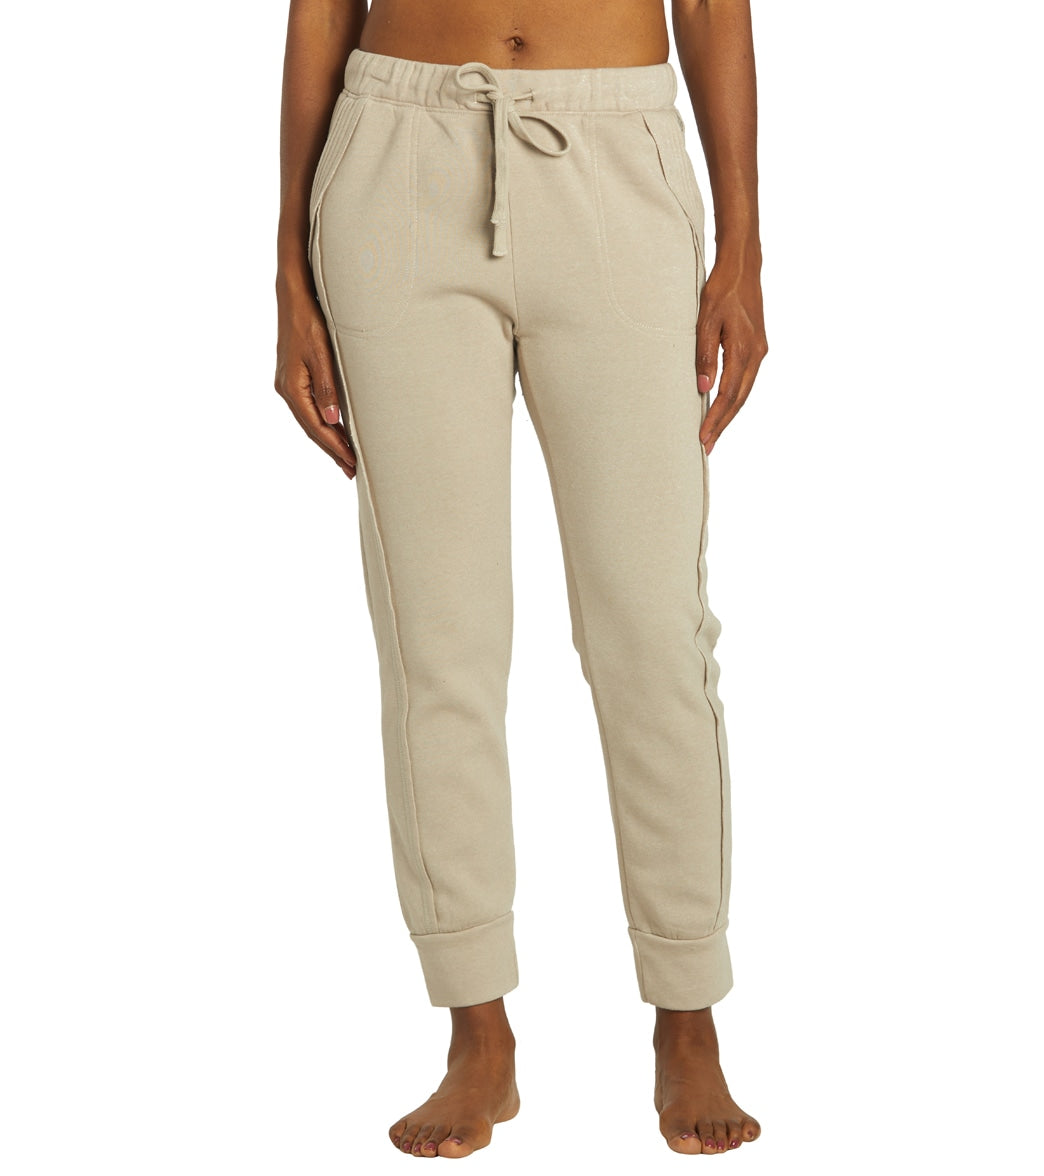 NWT Free People Around the Clock Jogger Oatmeal S